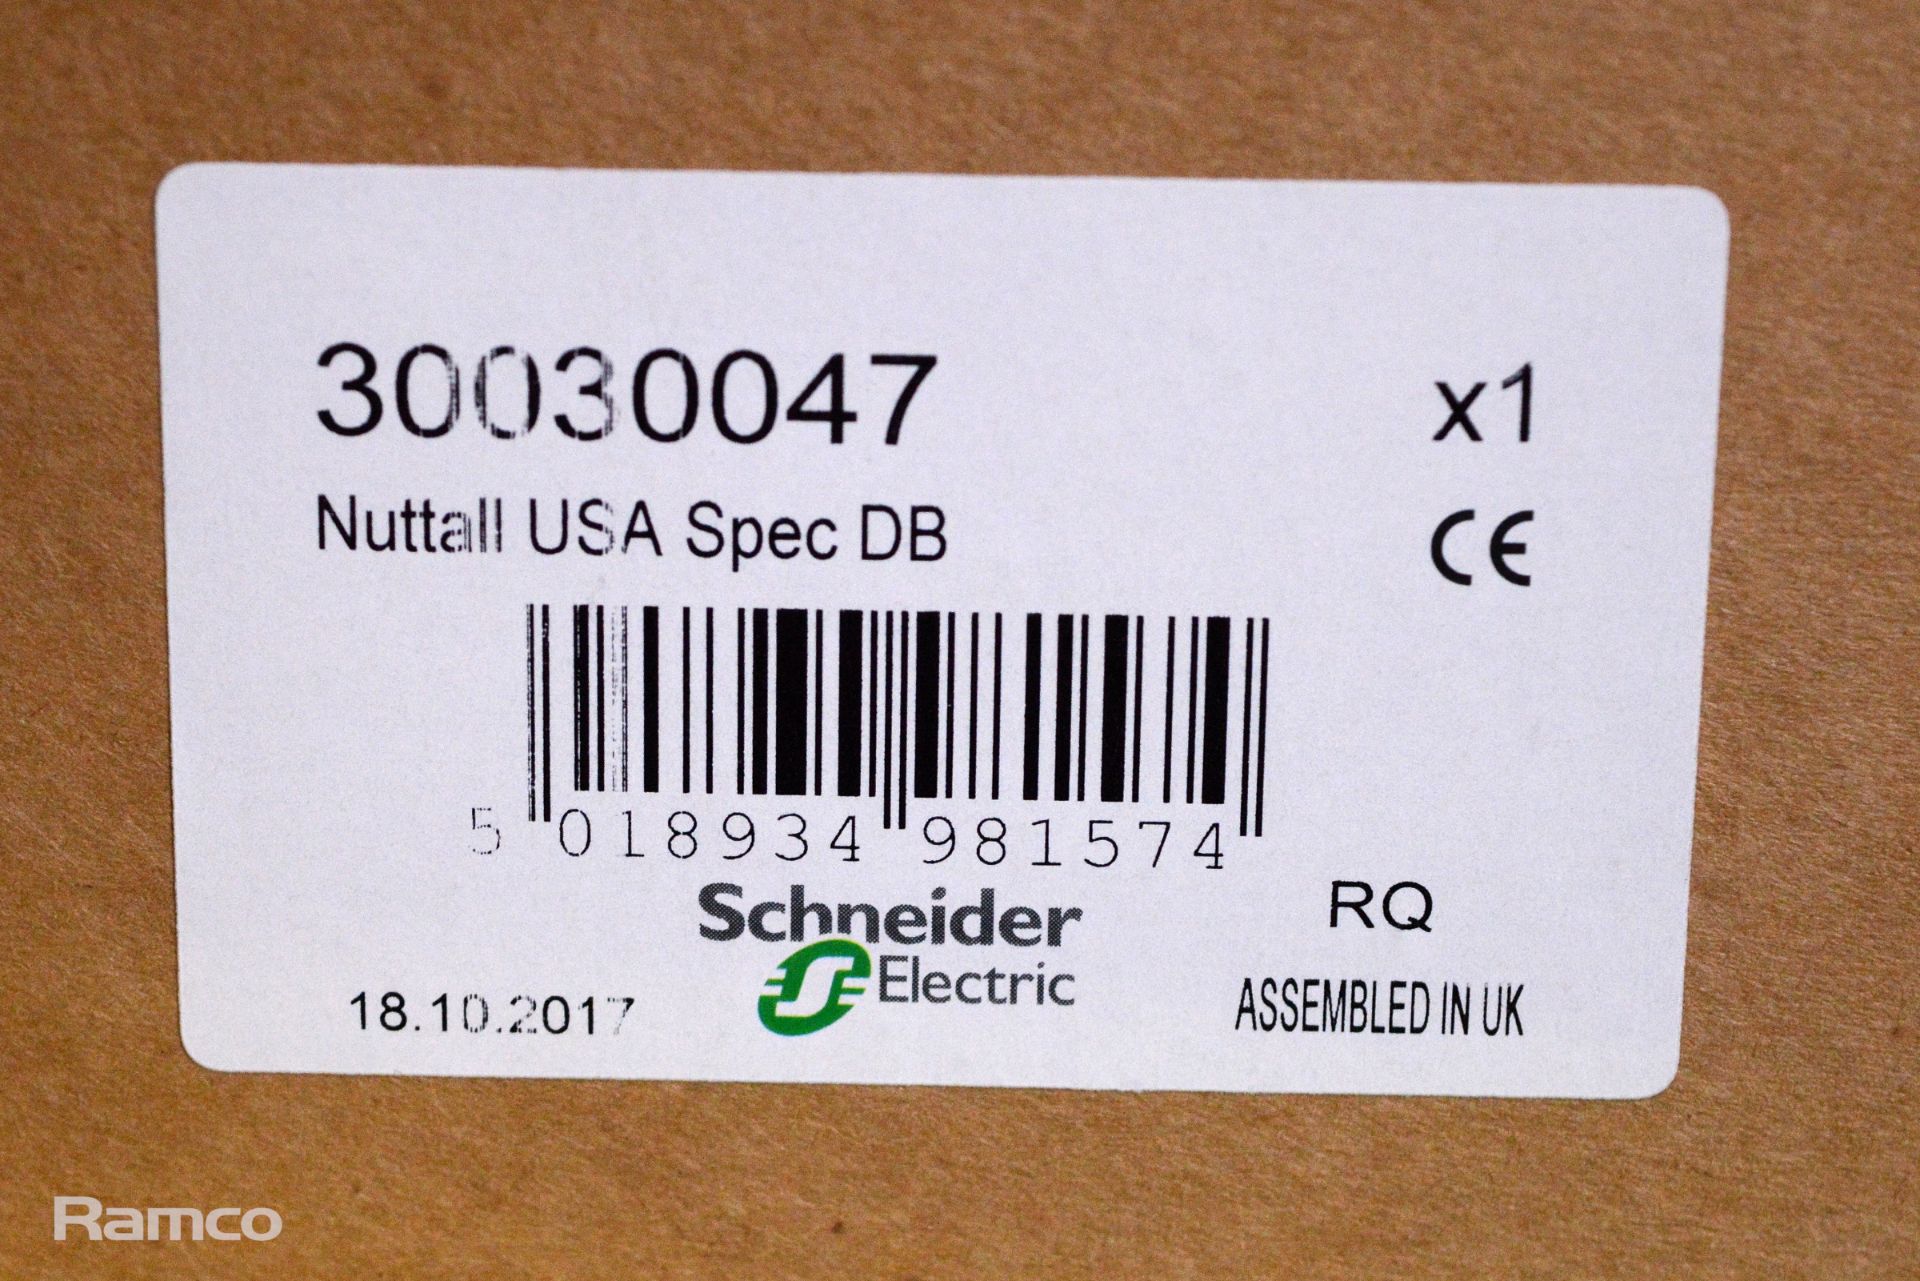 5x Schneider electrical control/fuse box, protected to IP55, 12x12x18cm - Image 2 of 2